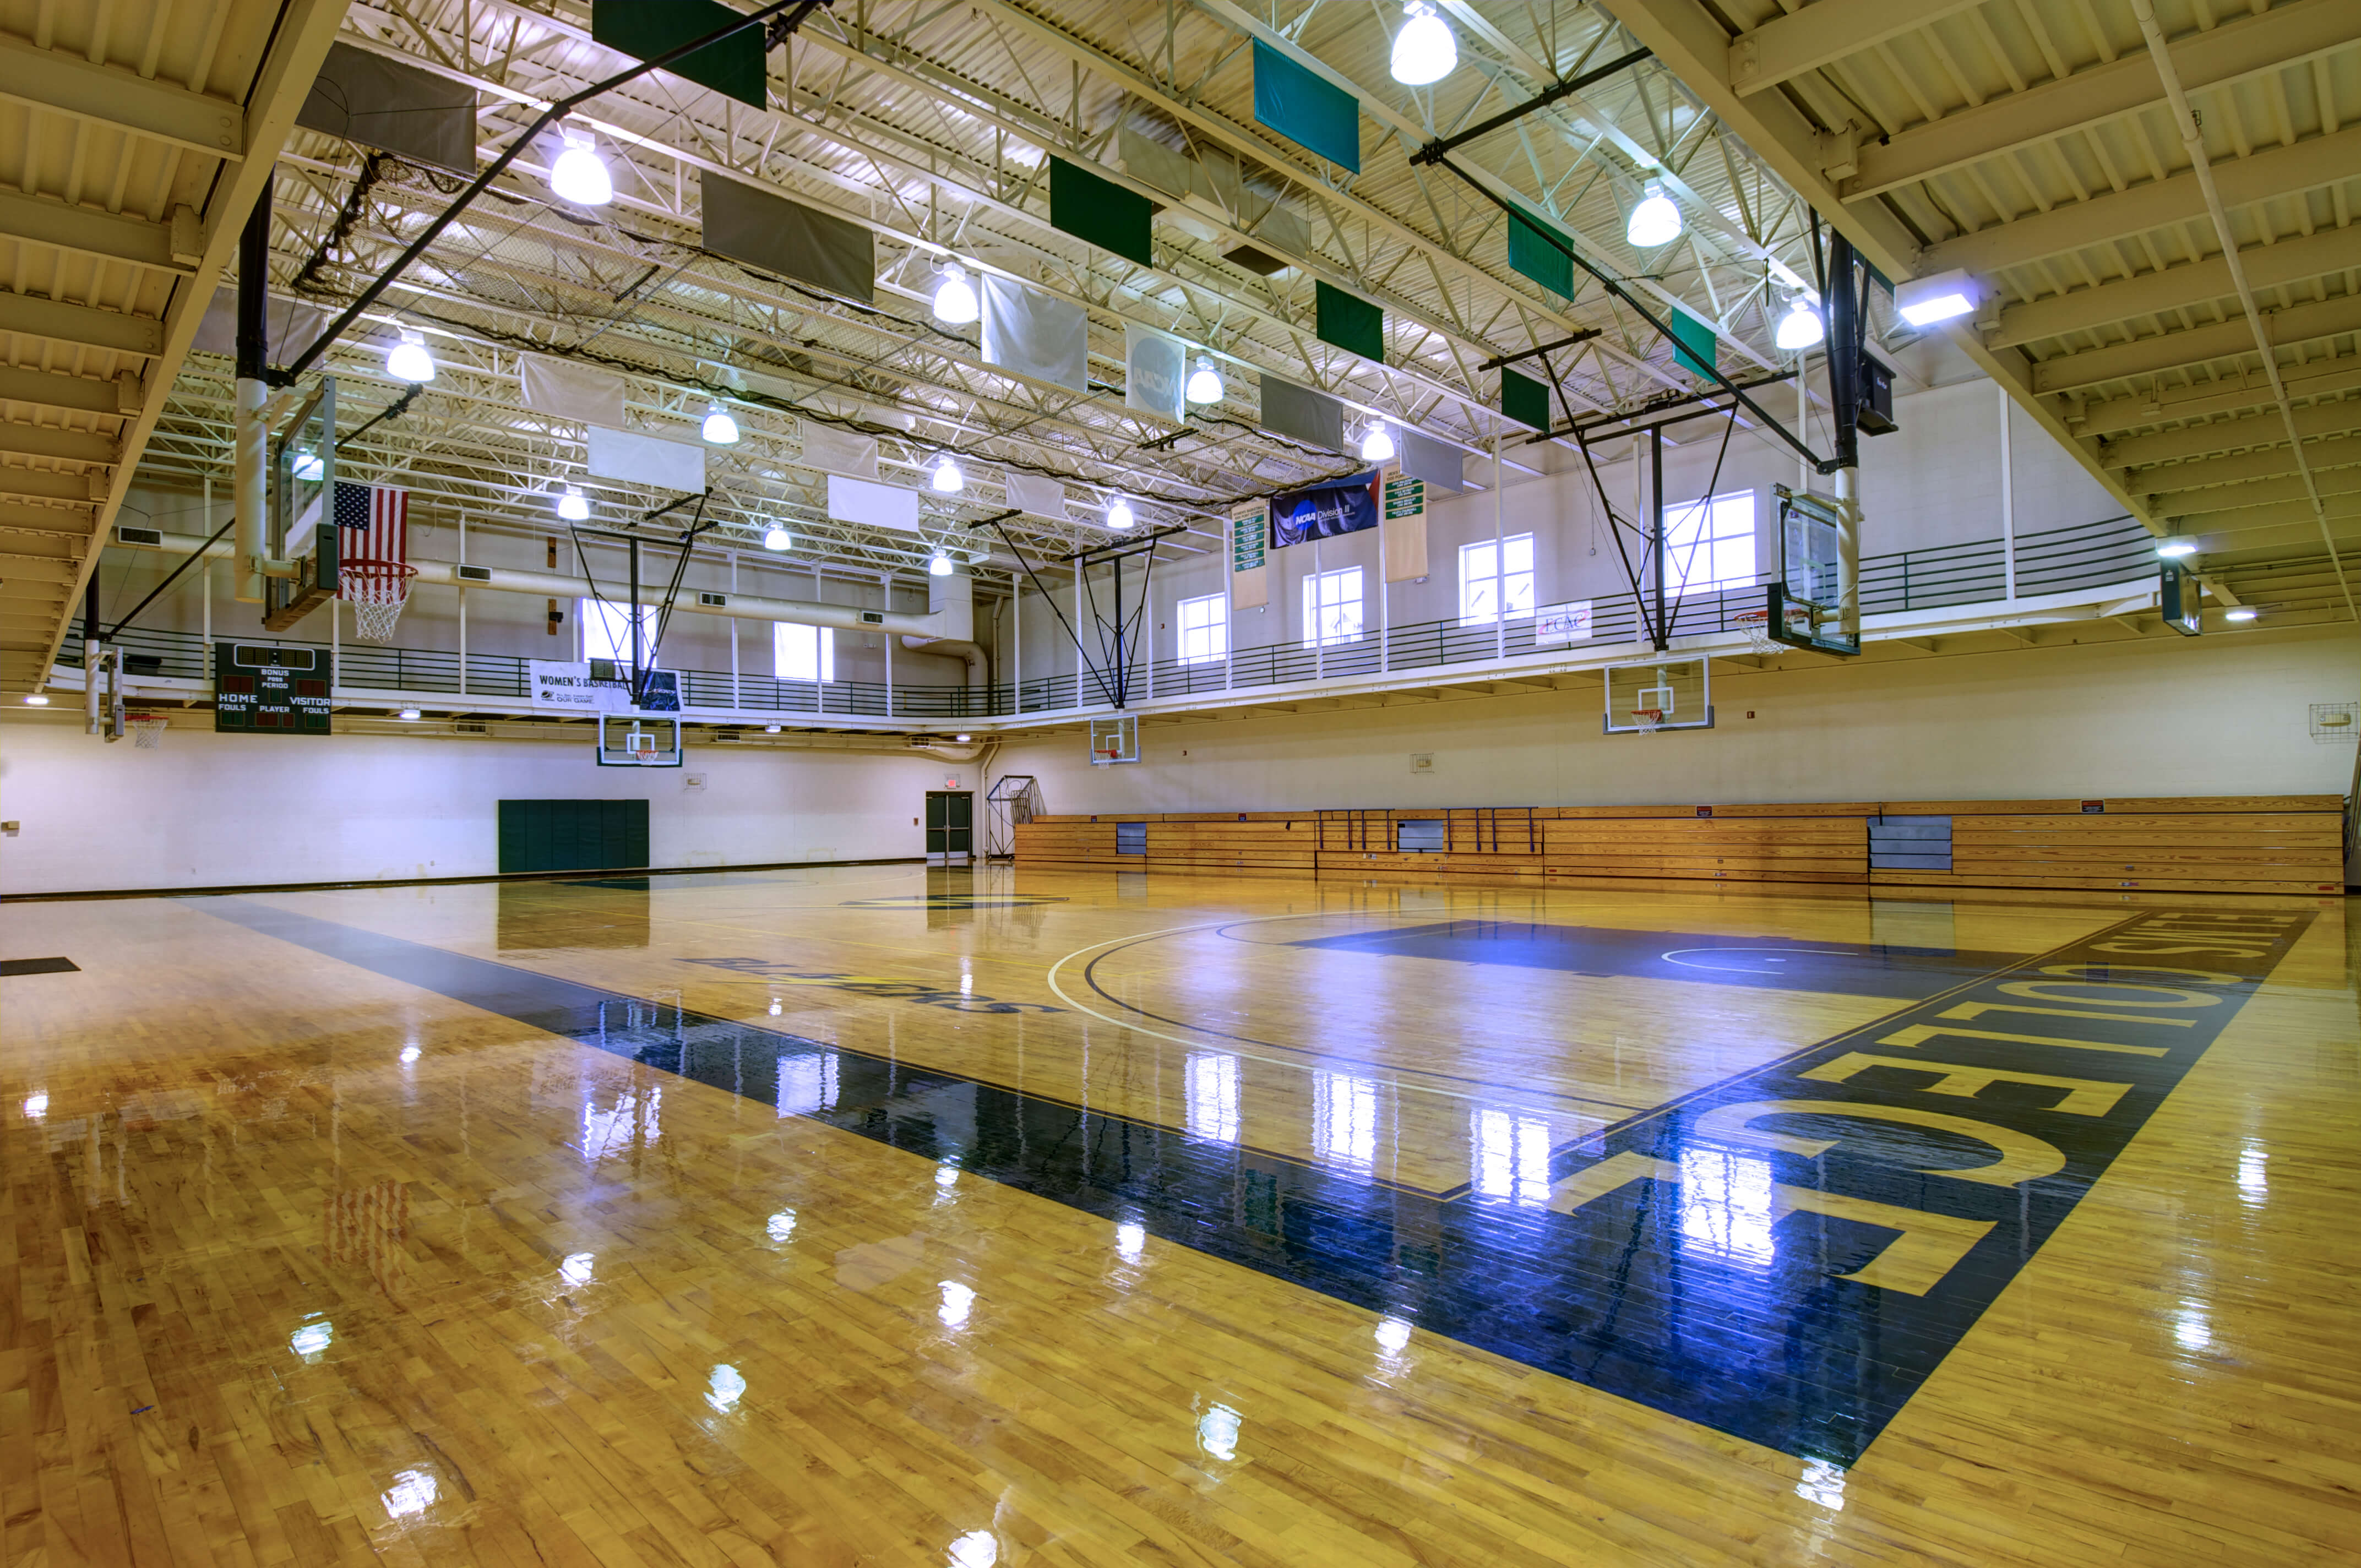 Photo of the basketball court in the Maguire Center